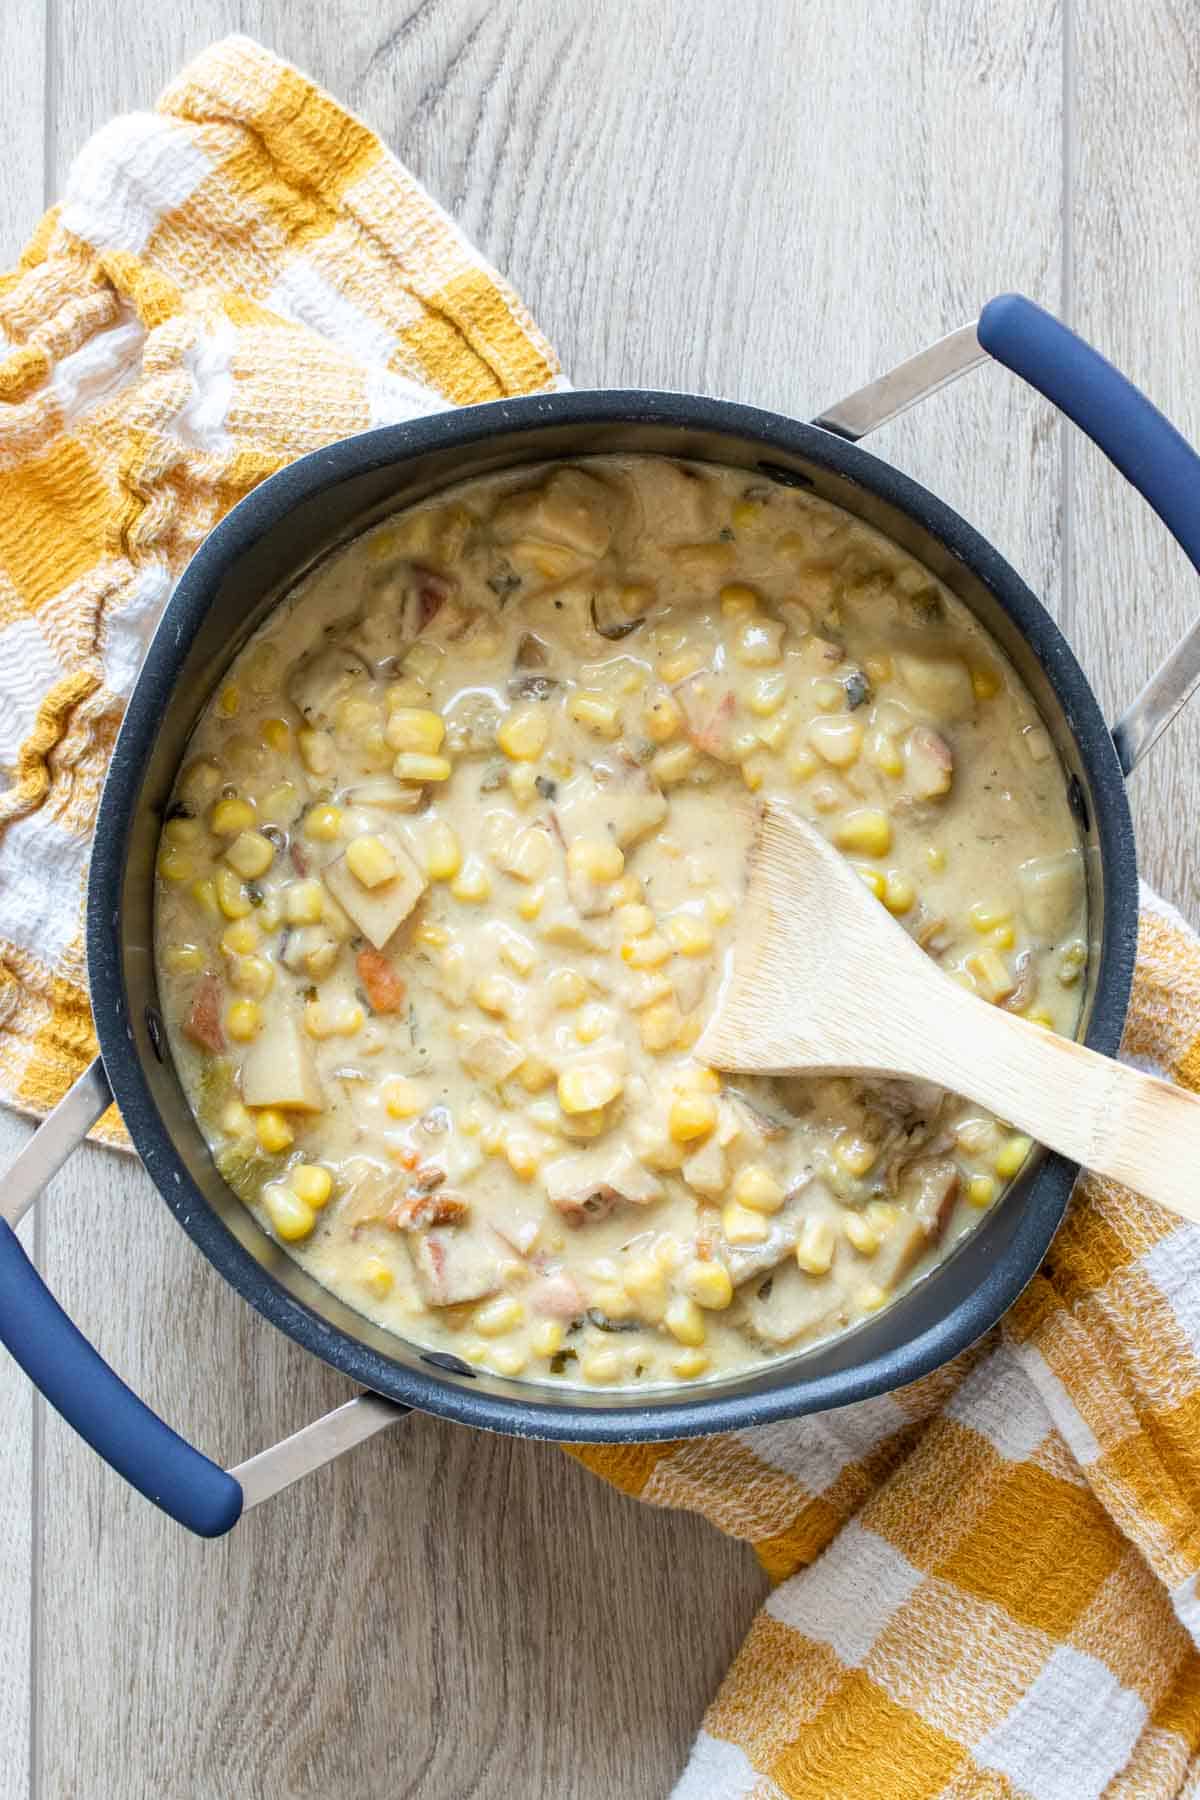 Wooden spoon mixing a creamy corn, potato and pepper soup in a pot